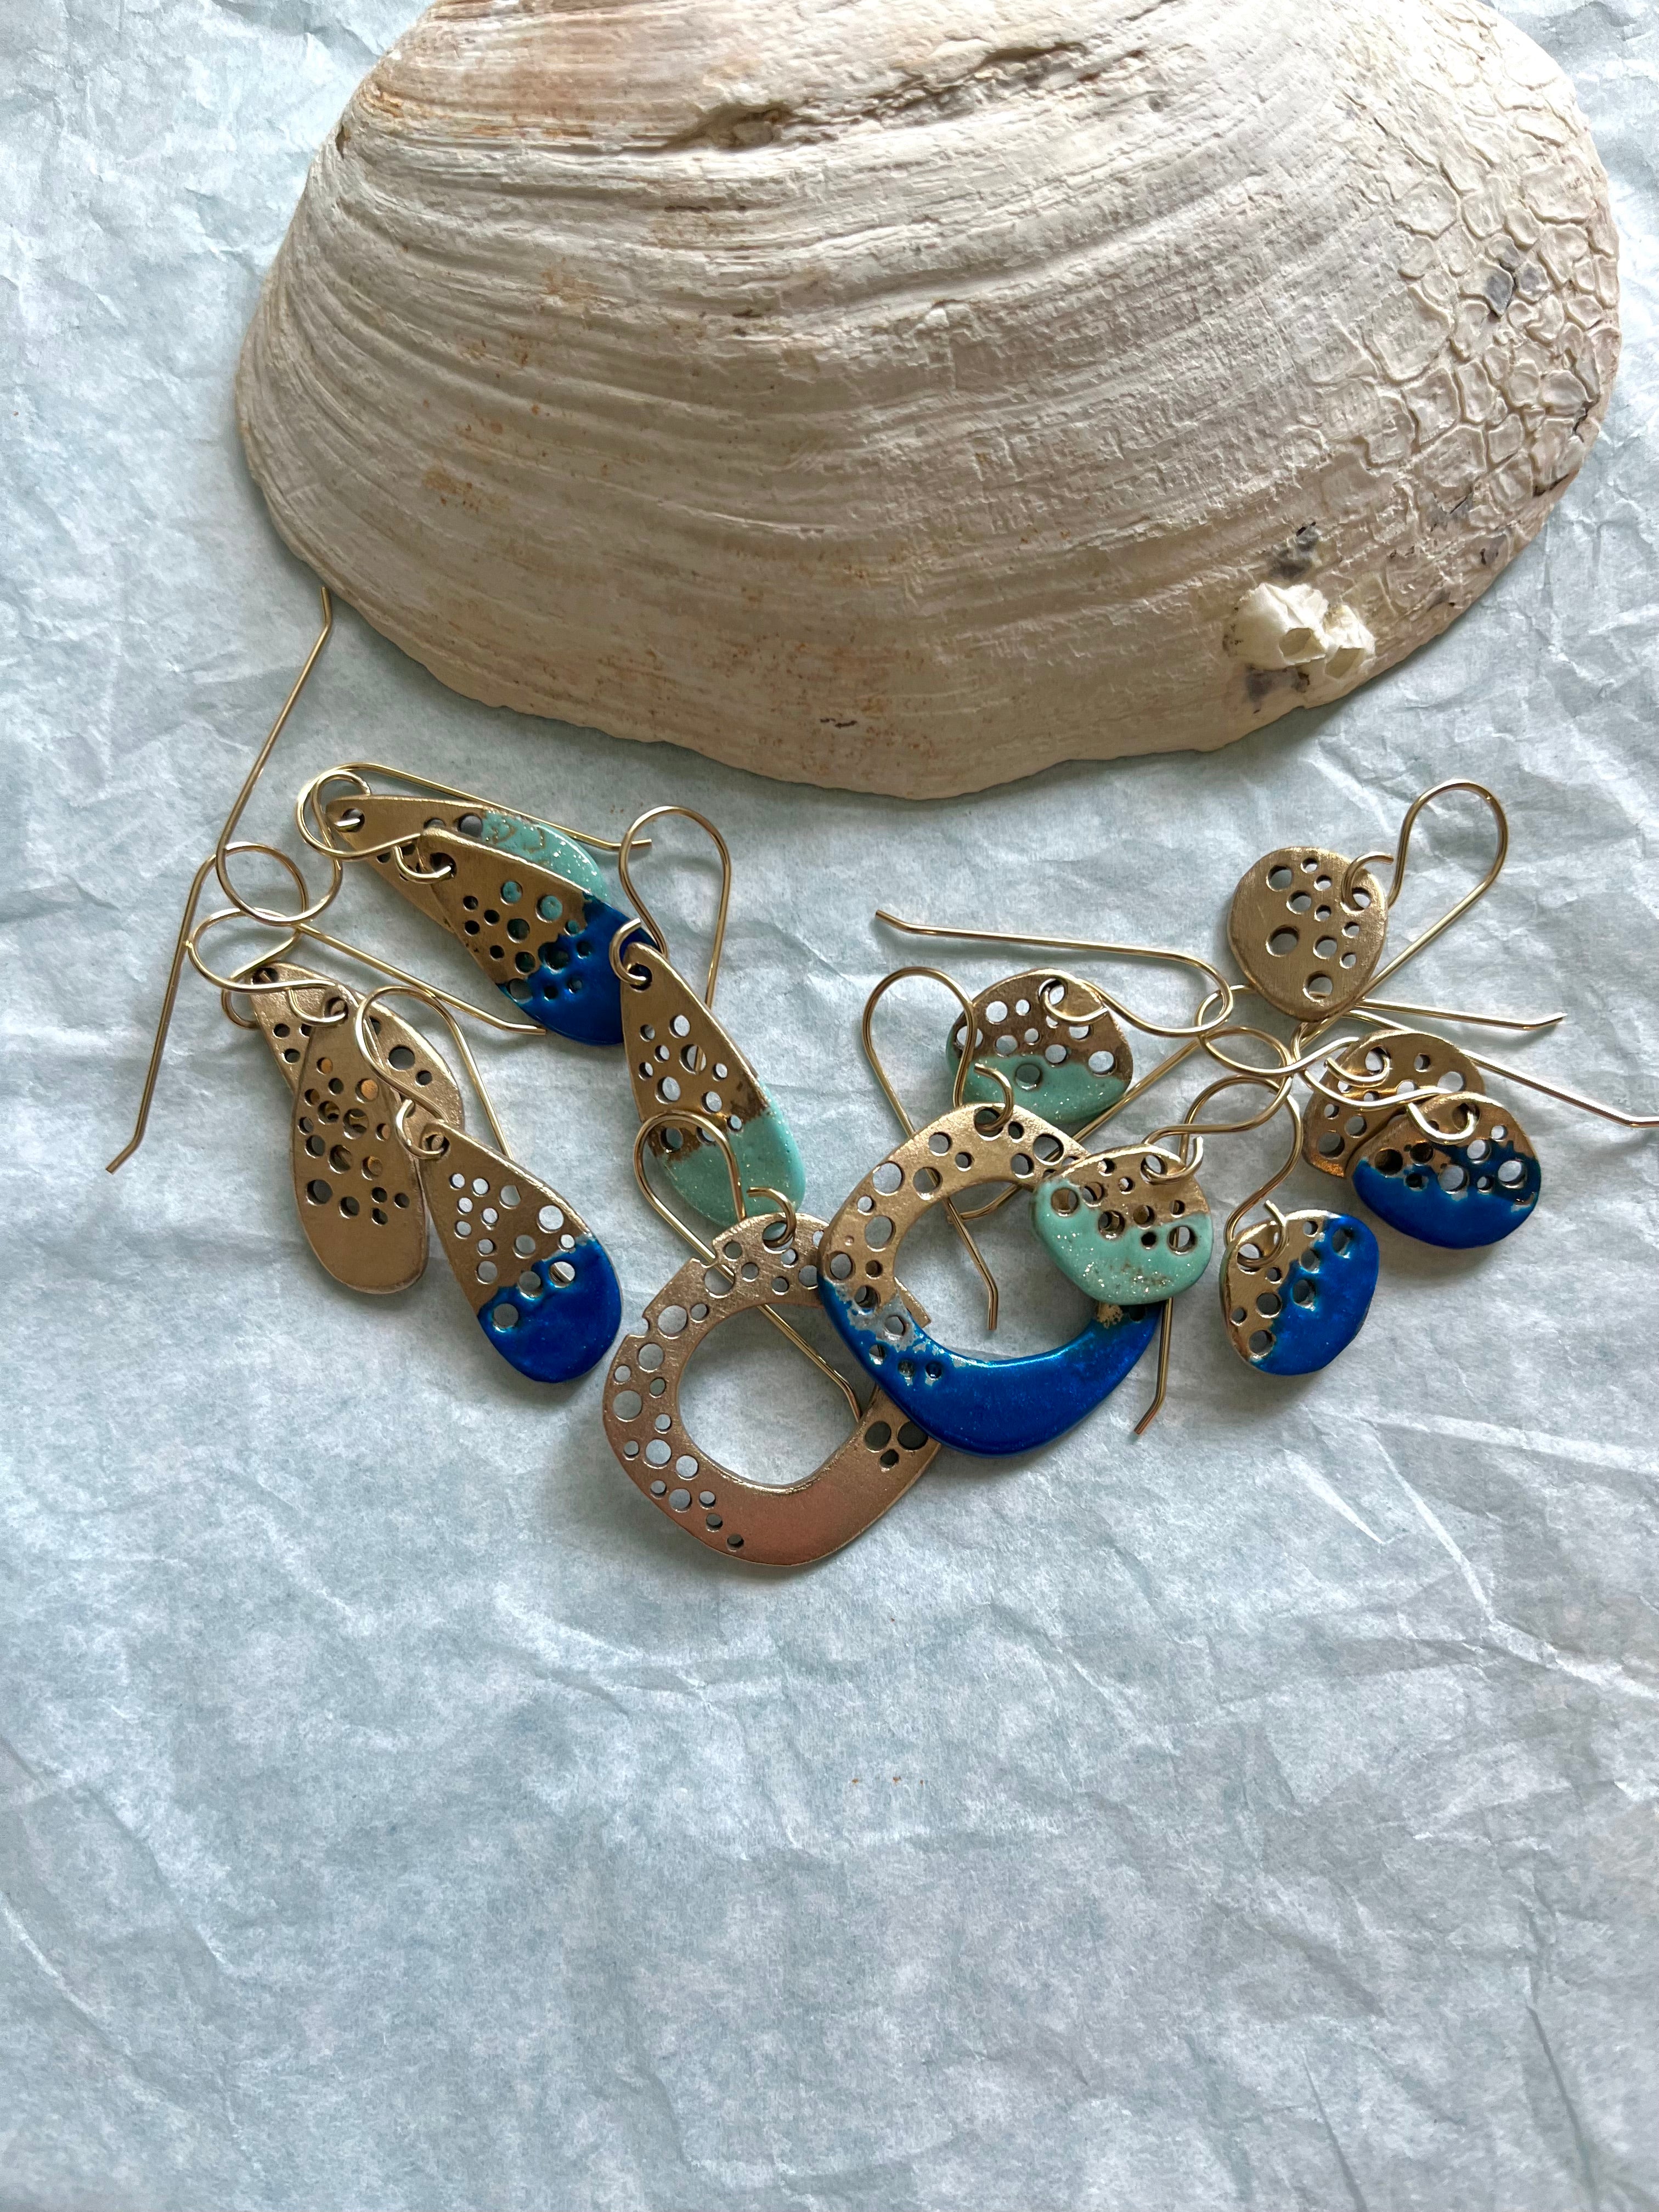 Ocean inspired earrings in blue and green colours